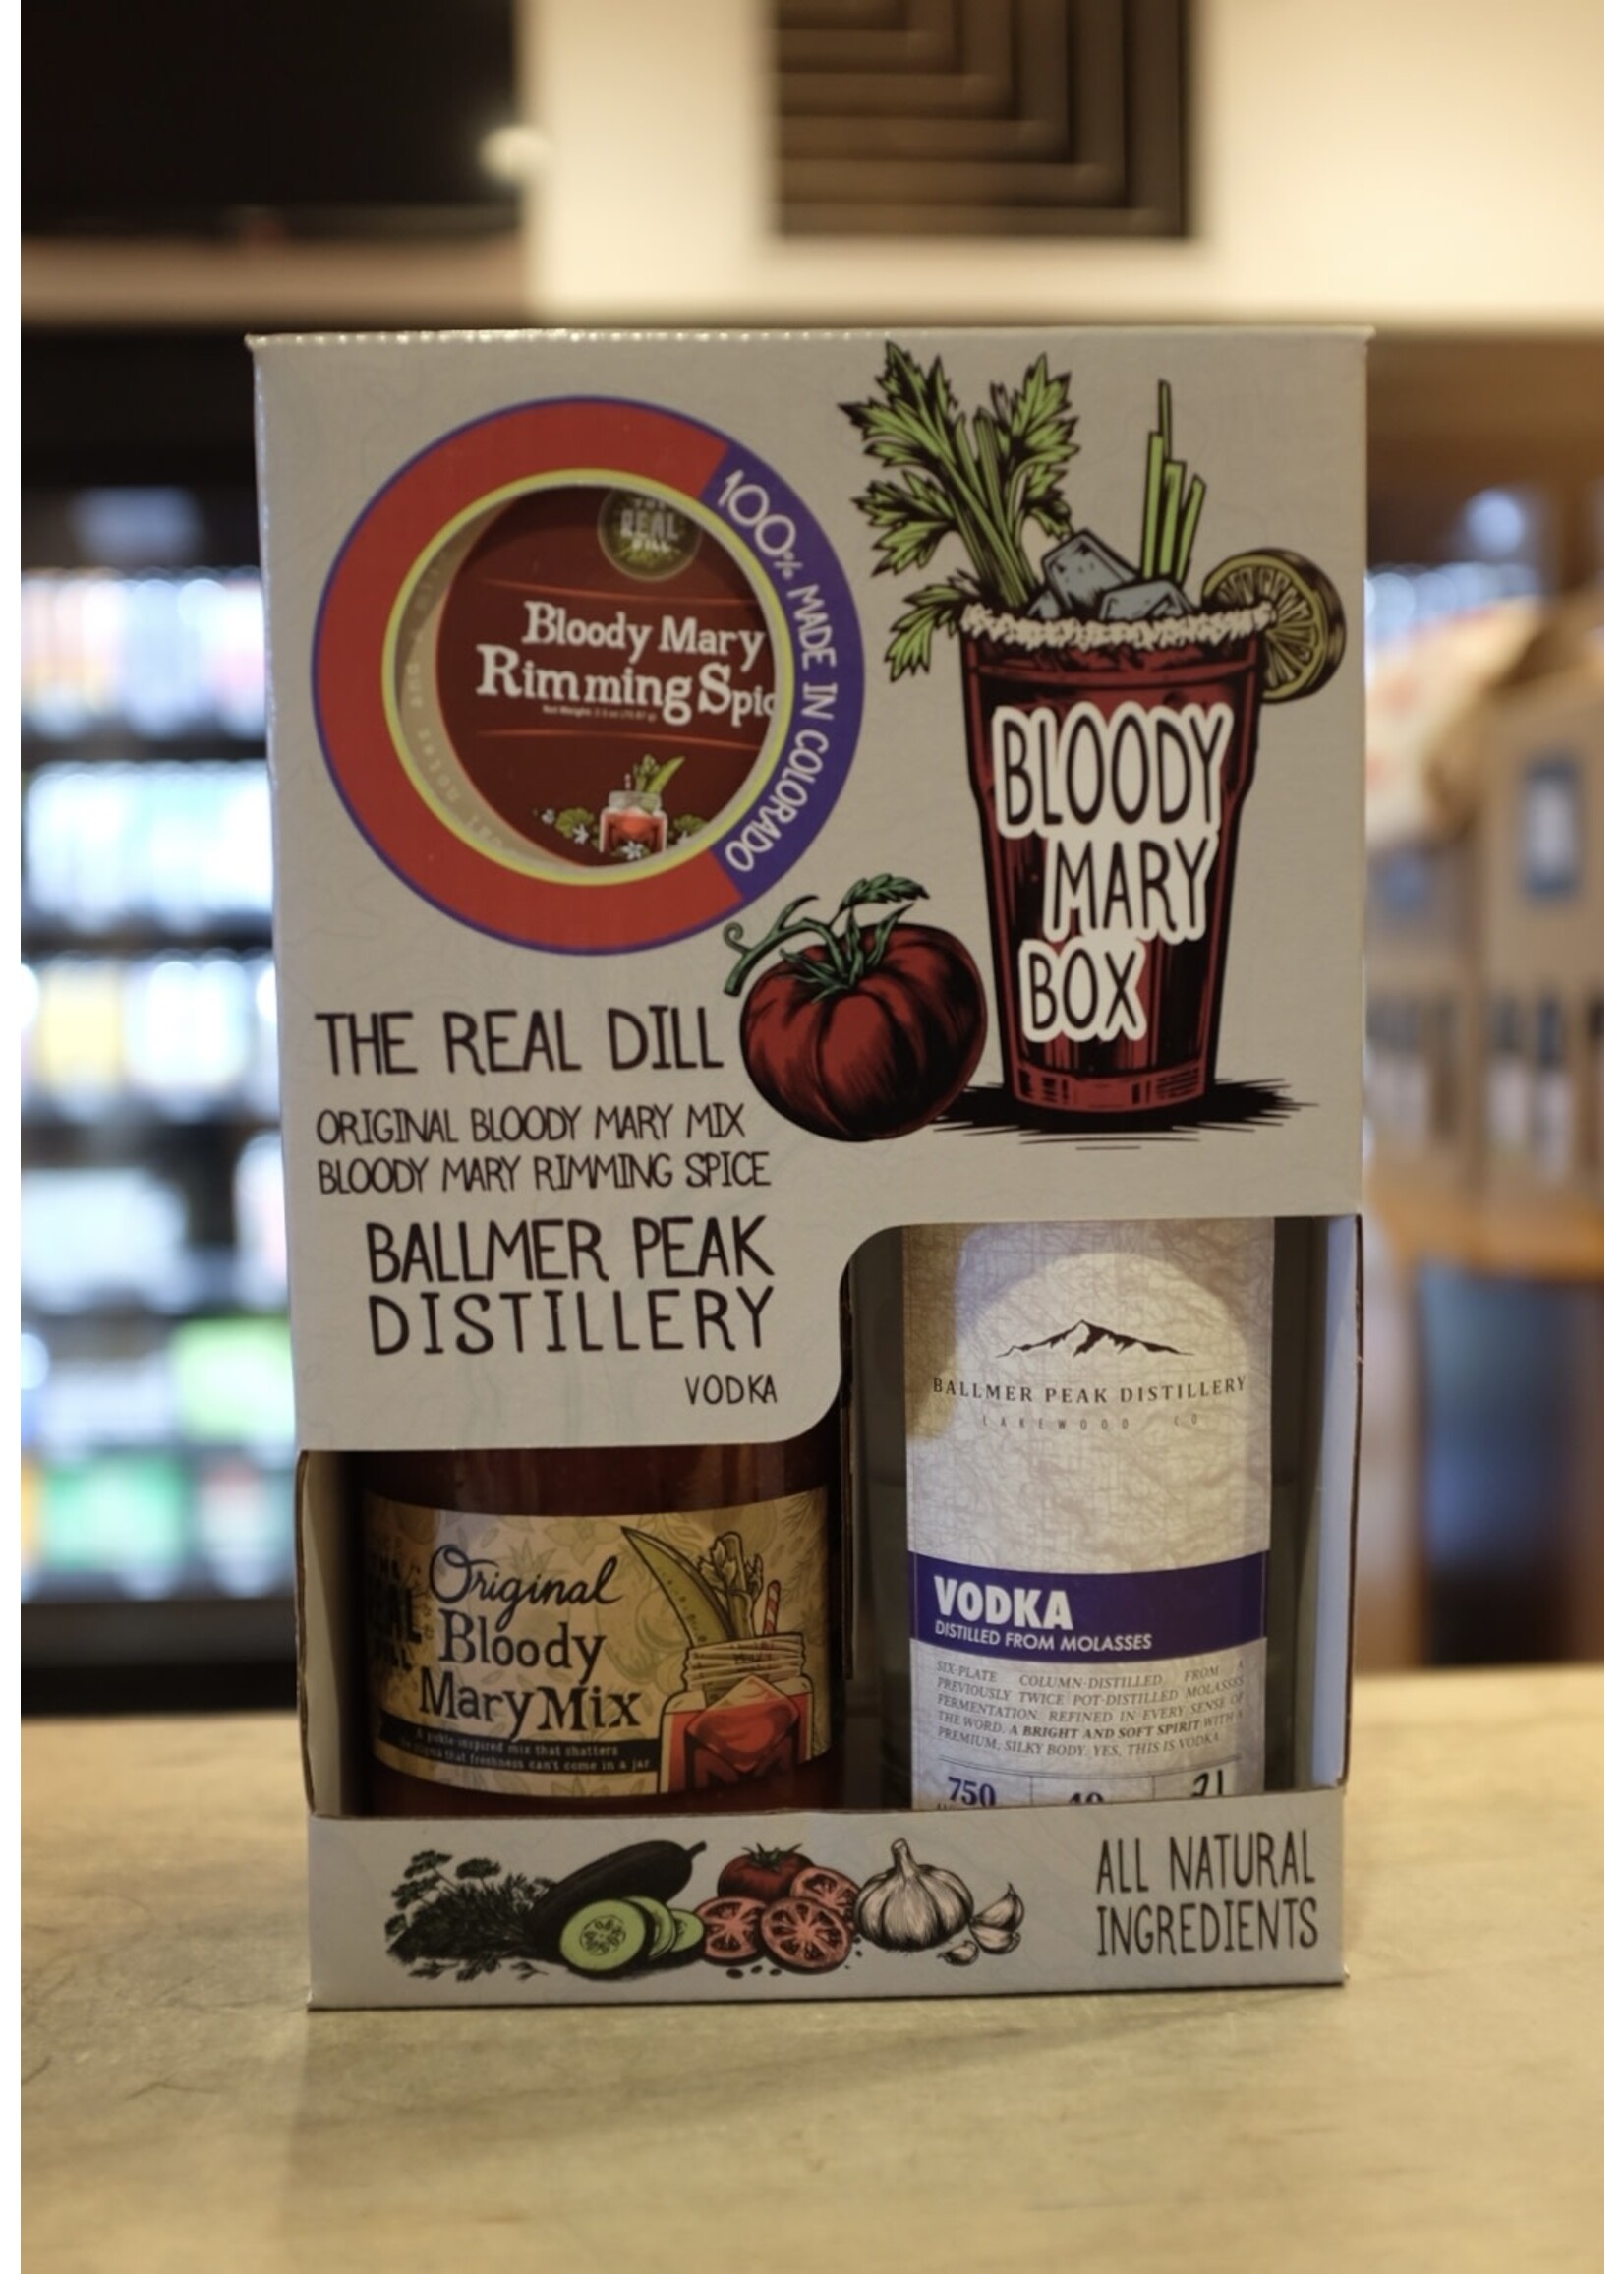 Mixer - The Real Dill/Ballmer Peak Distillery  - Bloody Mary Mix Box!